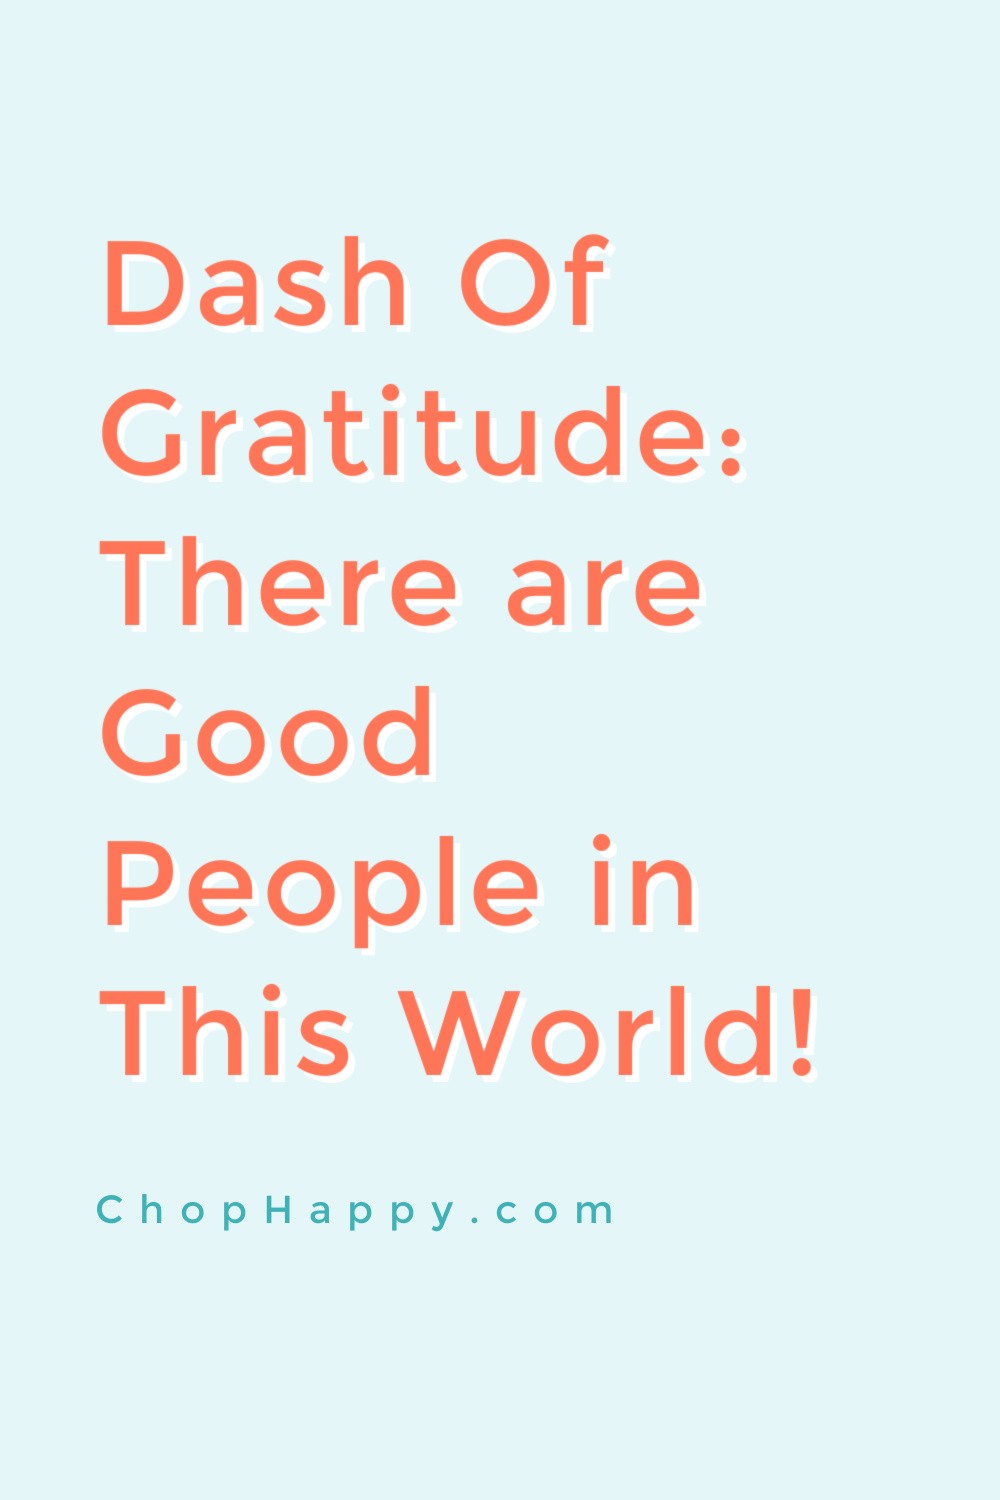 Dash Of Gratitude: There are Good People in This World! This motivational video is a a dash of hope and love in a crazy world. Hope this makes you happy! www.ChopHappy.com #attitudeofgratitude #motivationalvideo